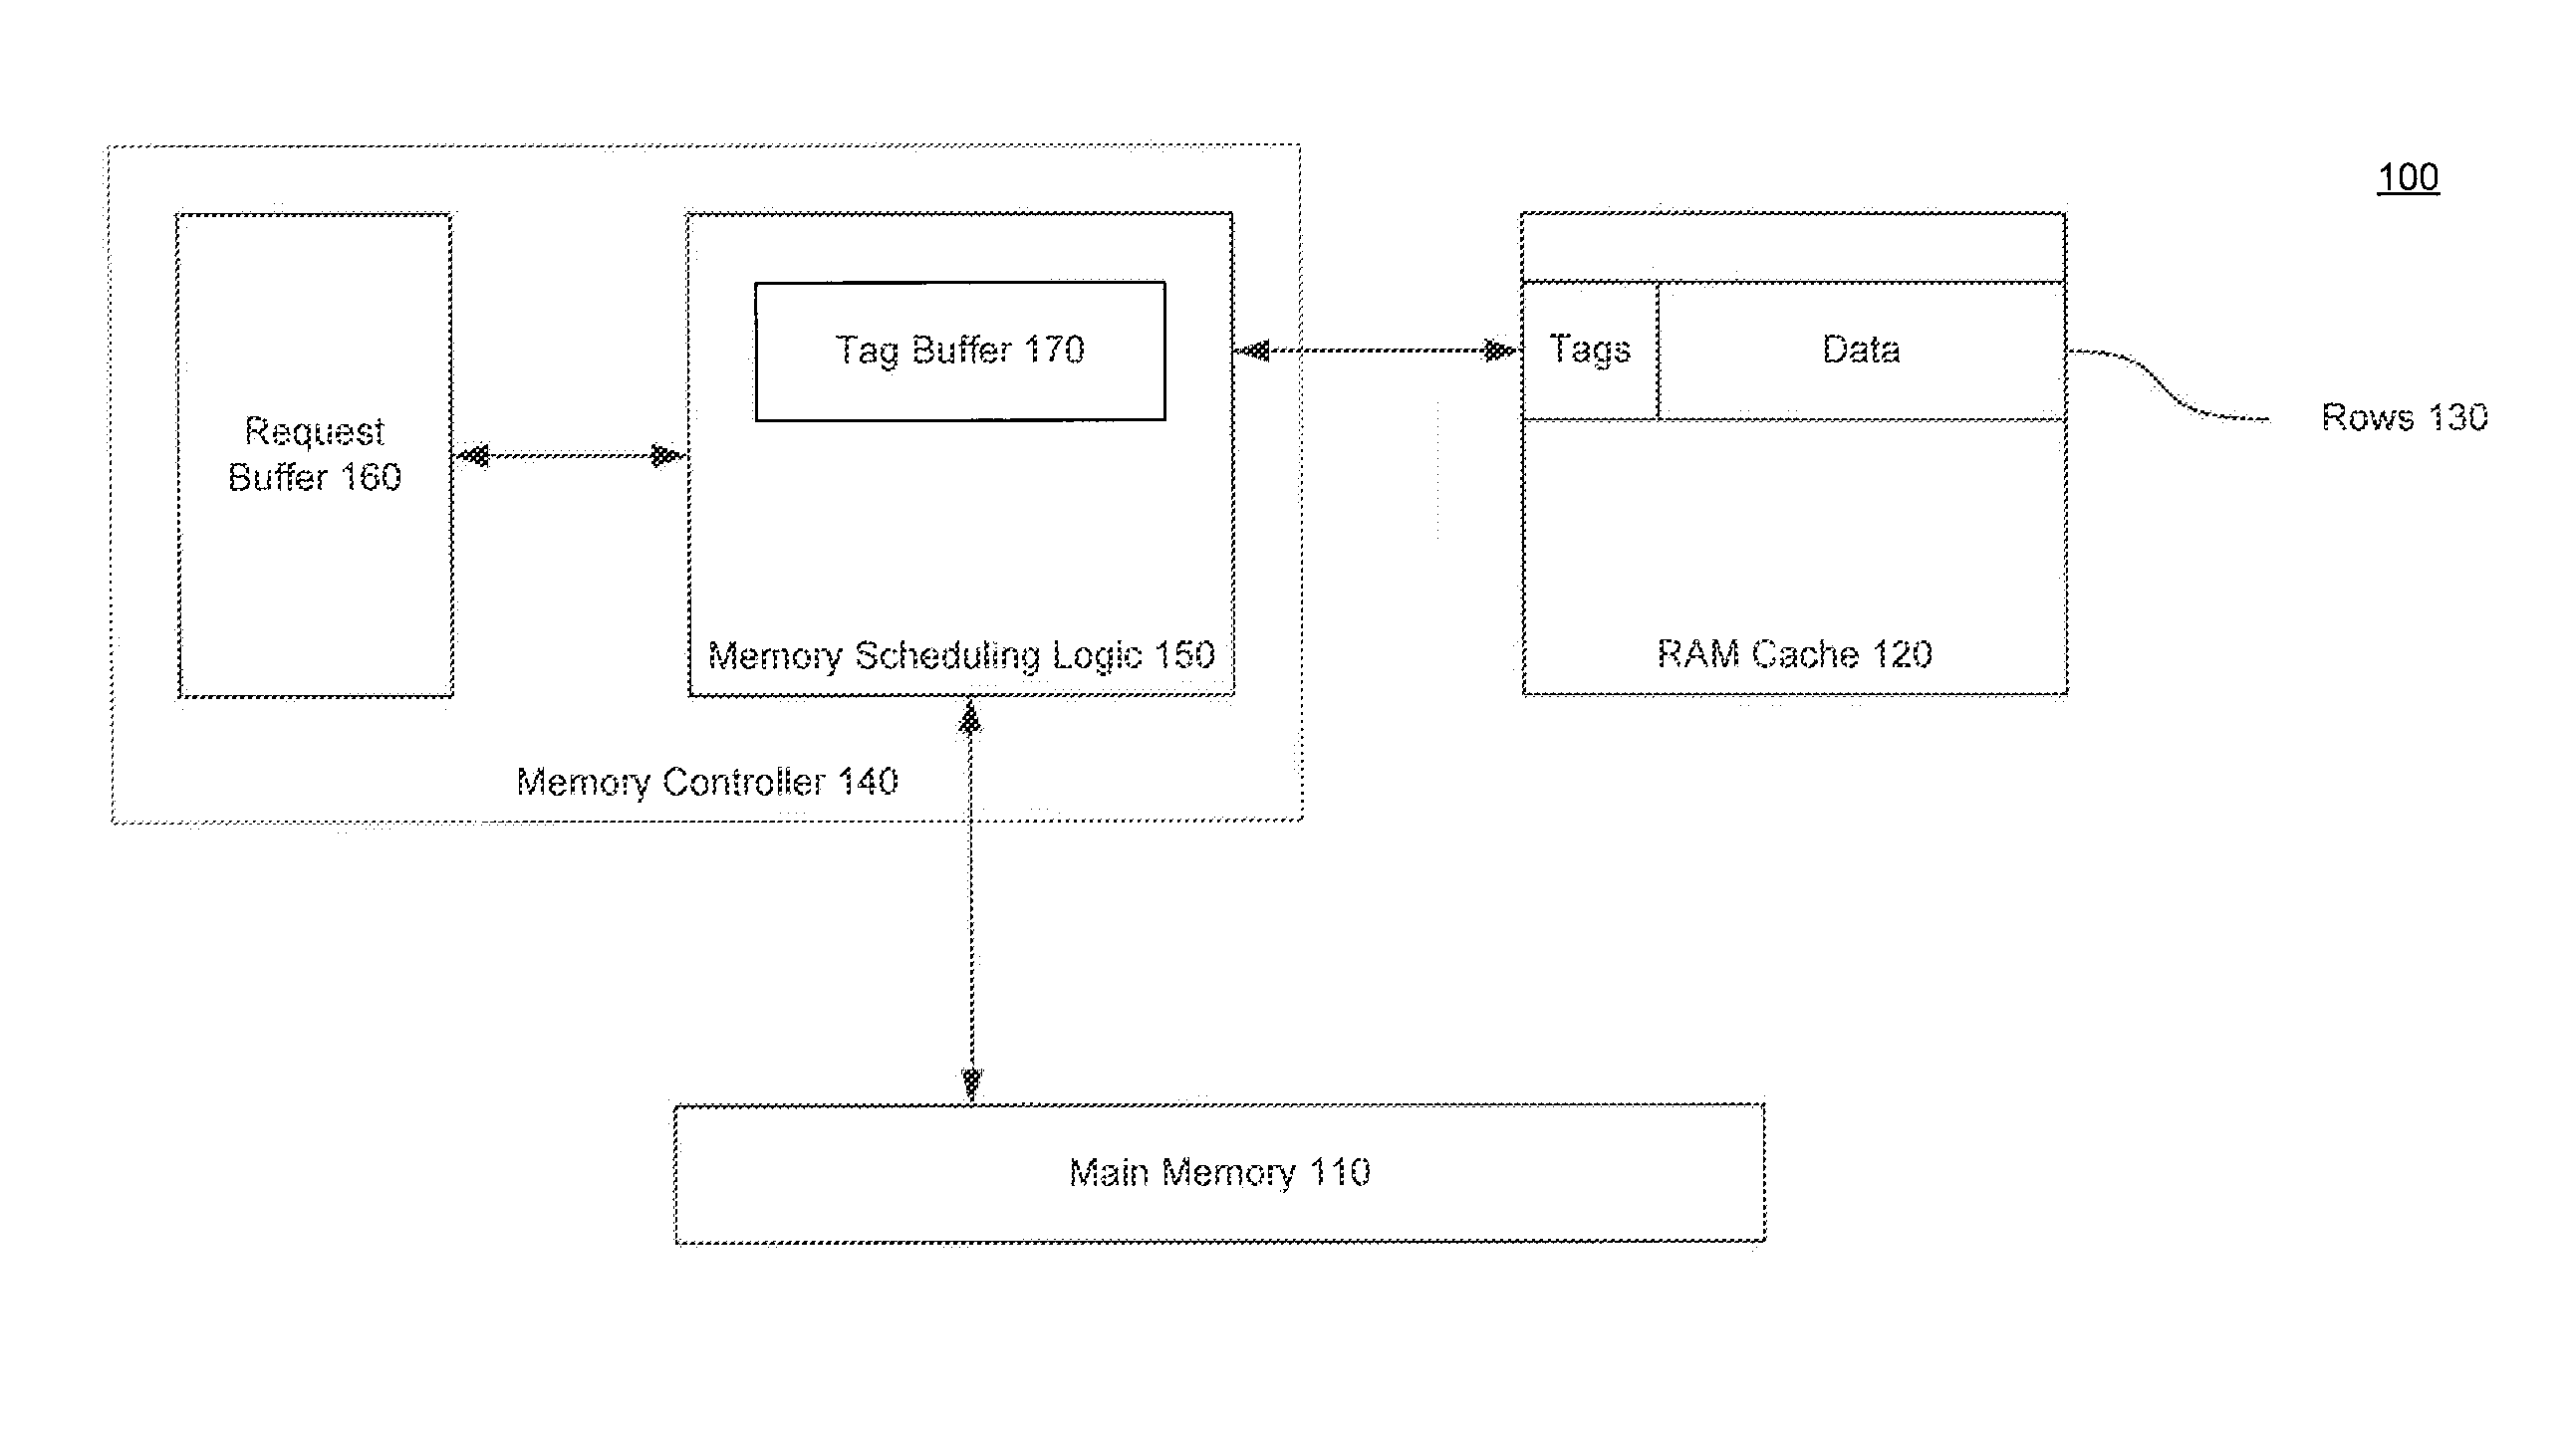 Memory Scheduling for RAM Caches Based on Tag Caching